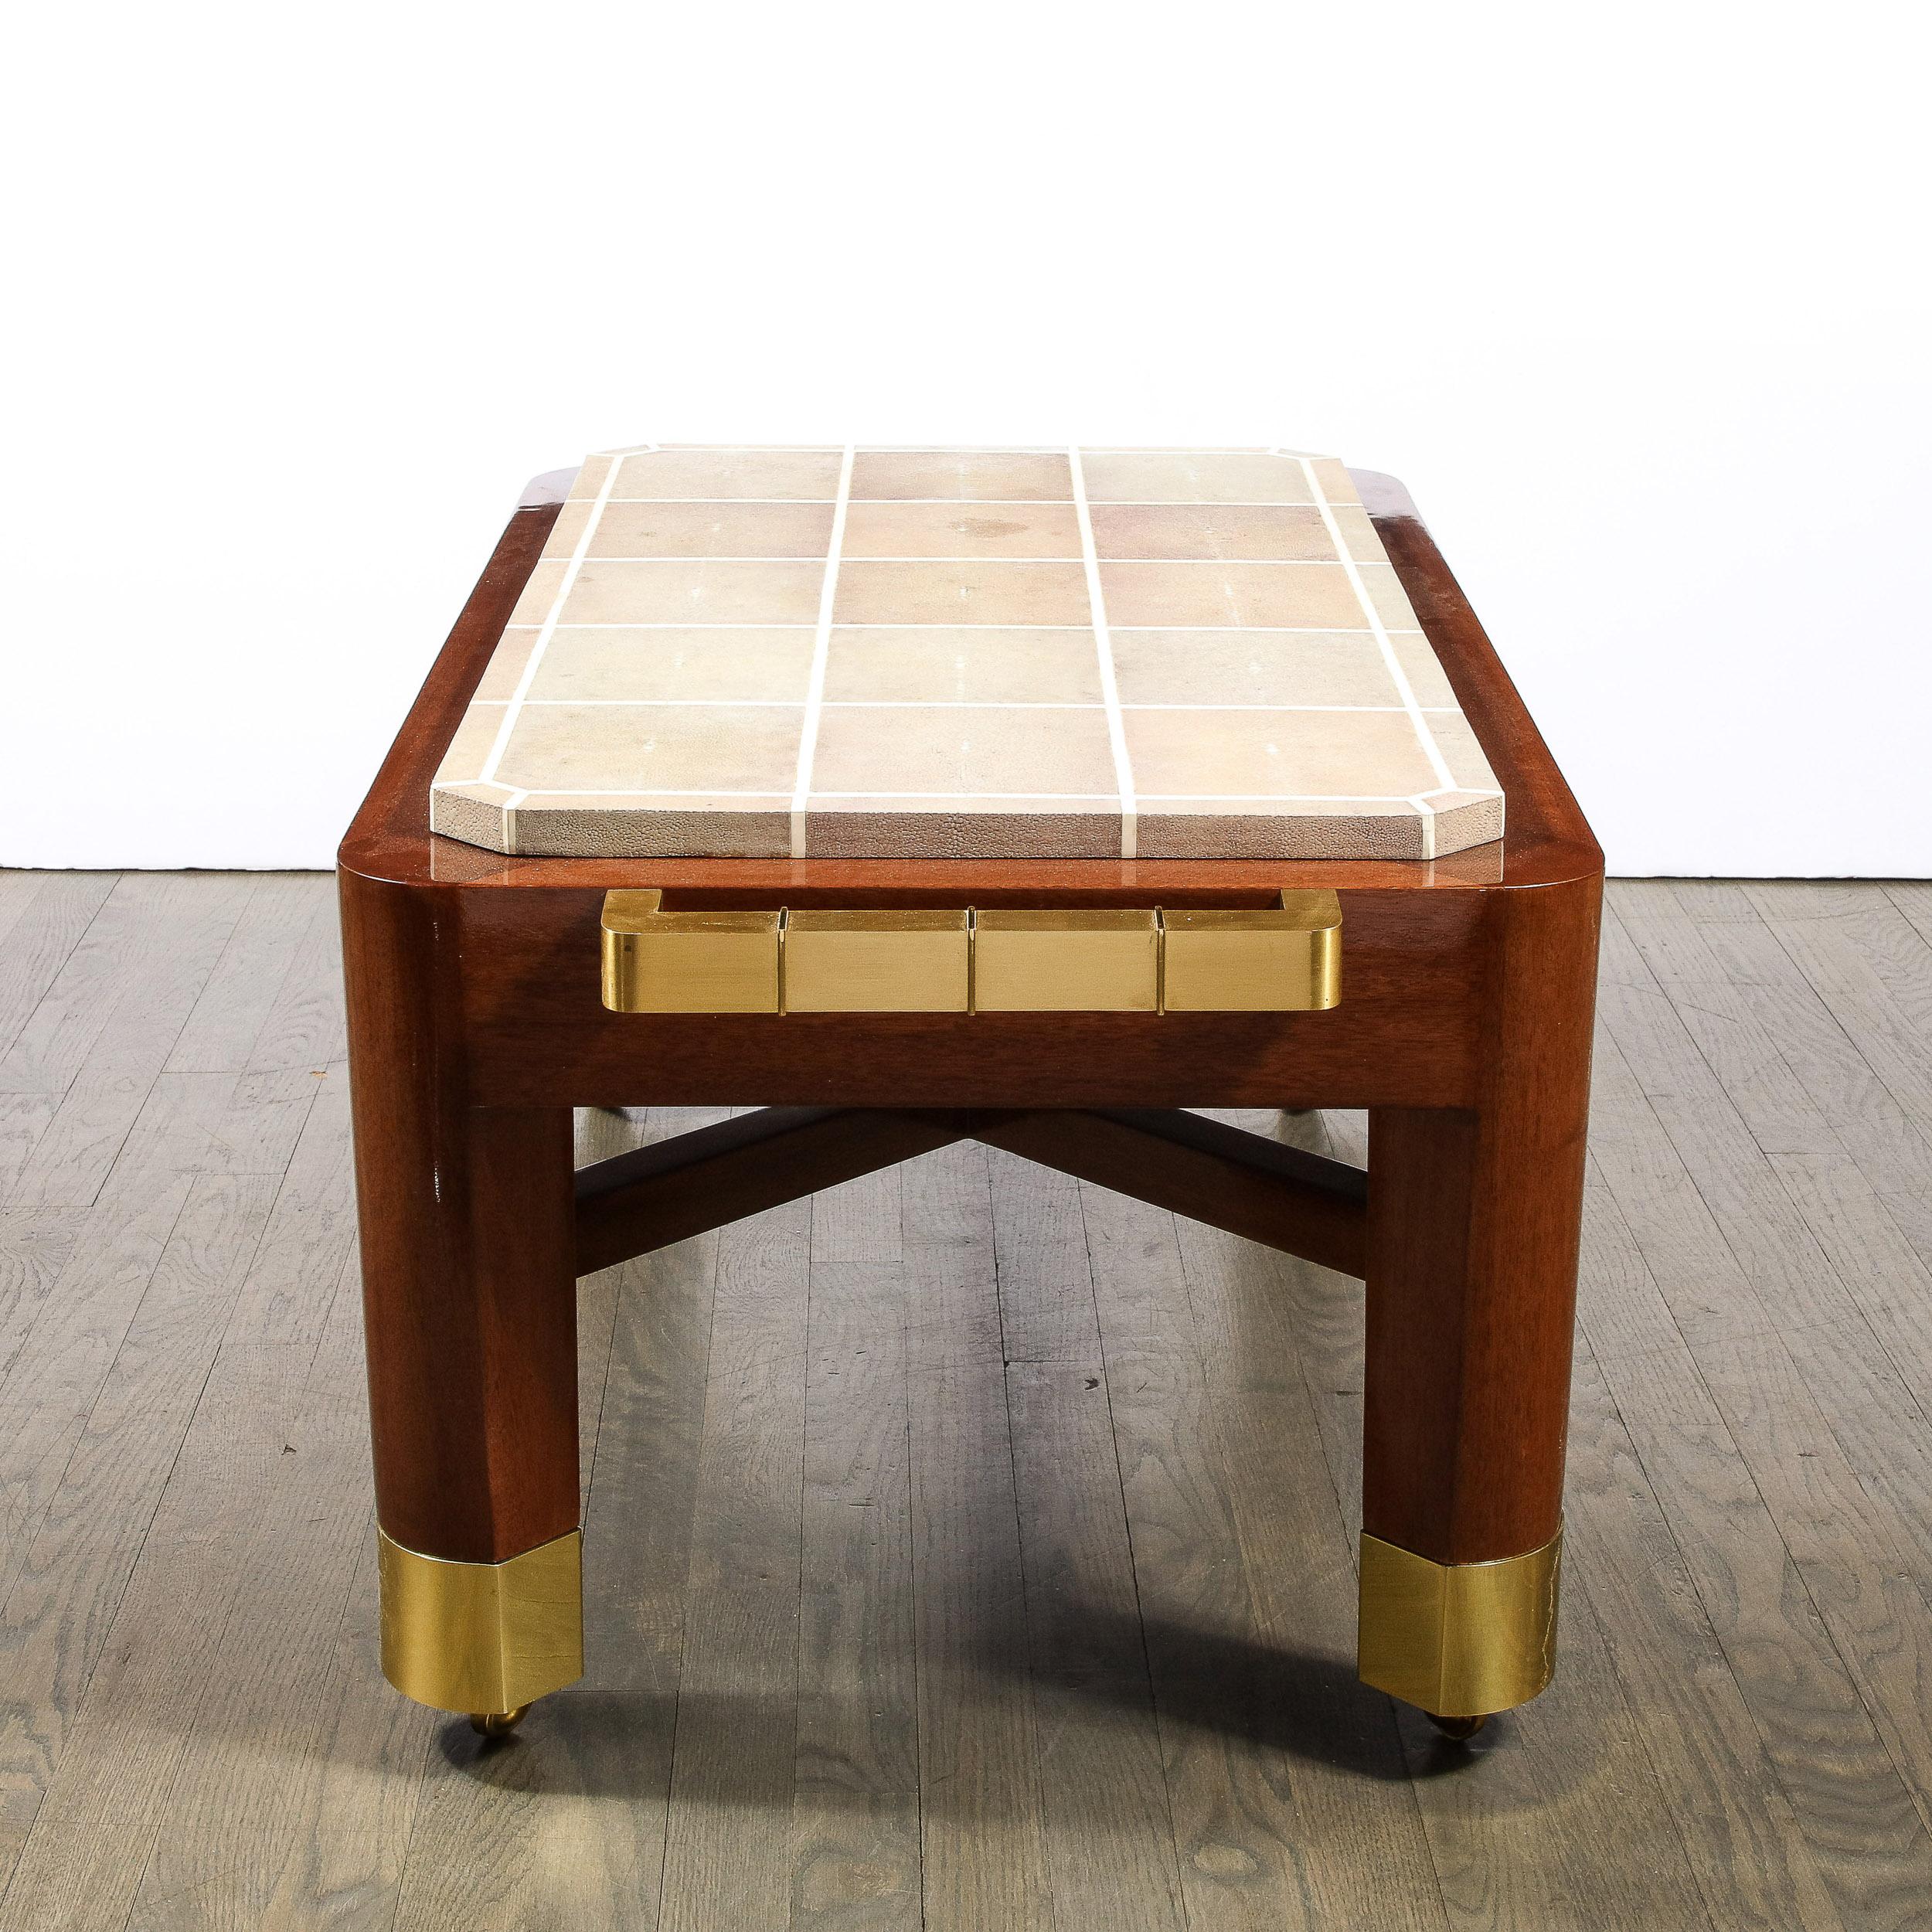 Modernist Cocktail Table with Shagreen Top & Brass Fittings by Lorin Marsh For Sale 6